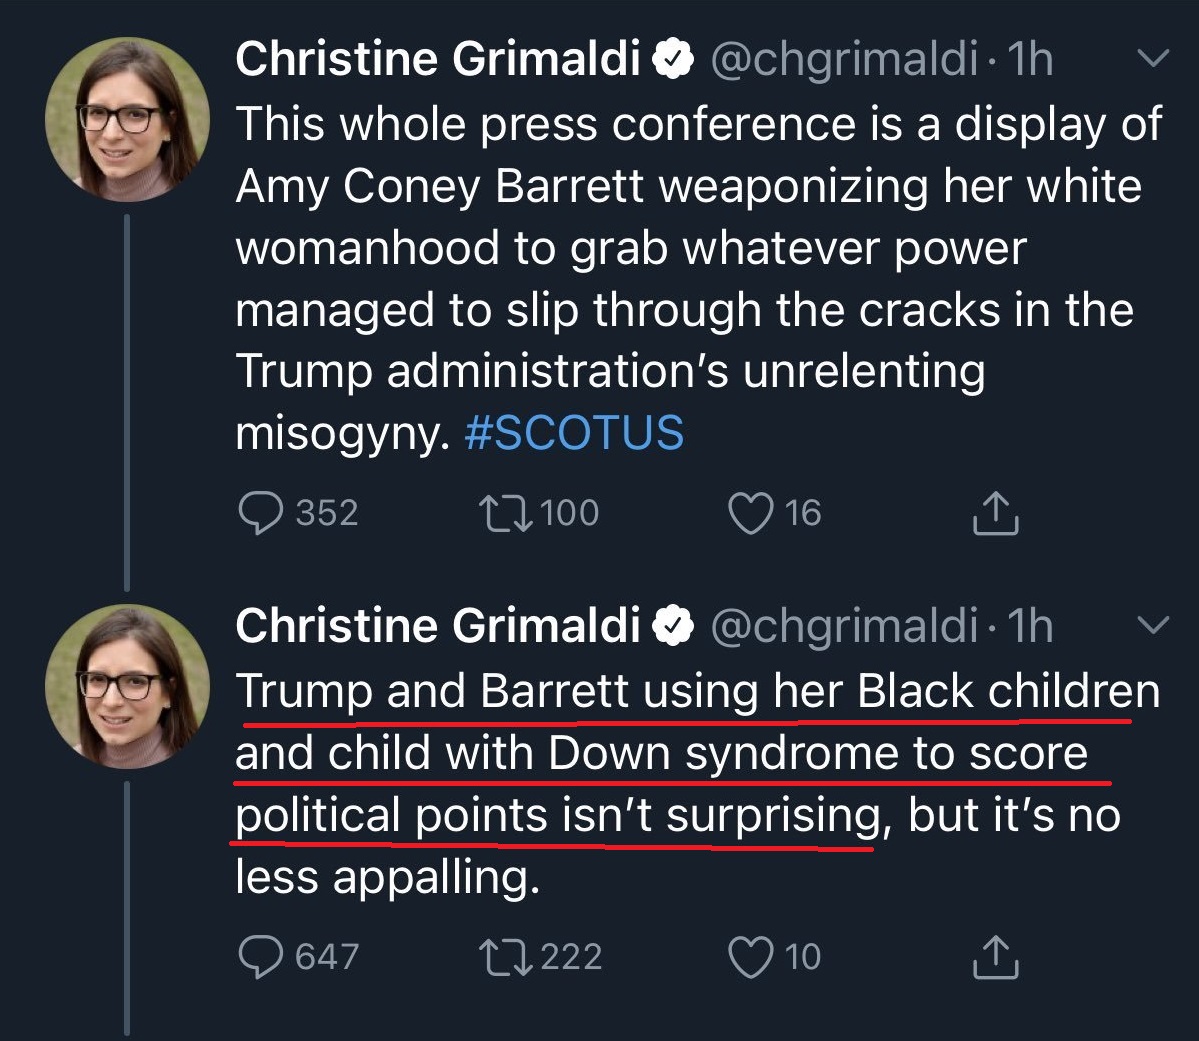 1/The Woke are attacking: **ADOPTION**Check the screenshots.Well educated people: professors, consultants, and authors, are attacking the woman Trump nominated to the Supreme Court for adopting orphans from Haiti.In woke-world this is normal and I'll explain whyA thread: